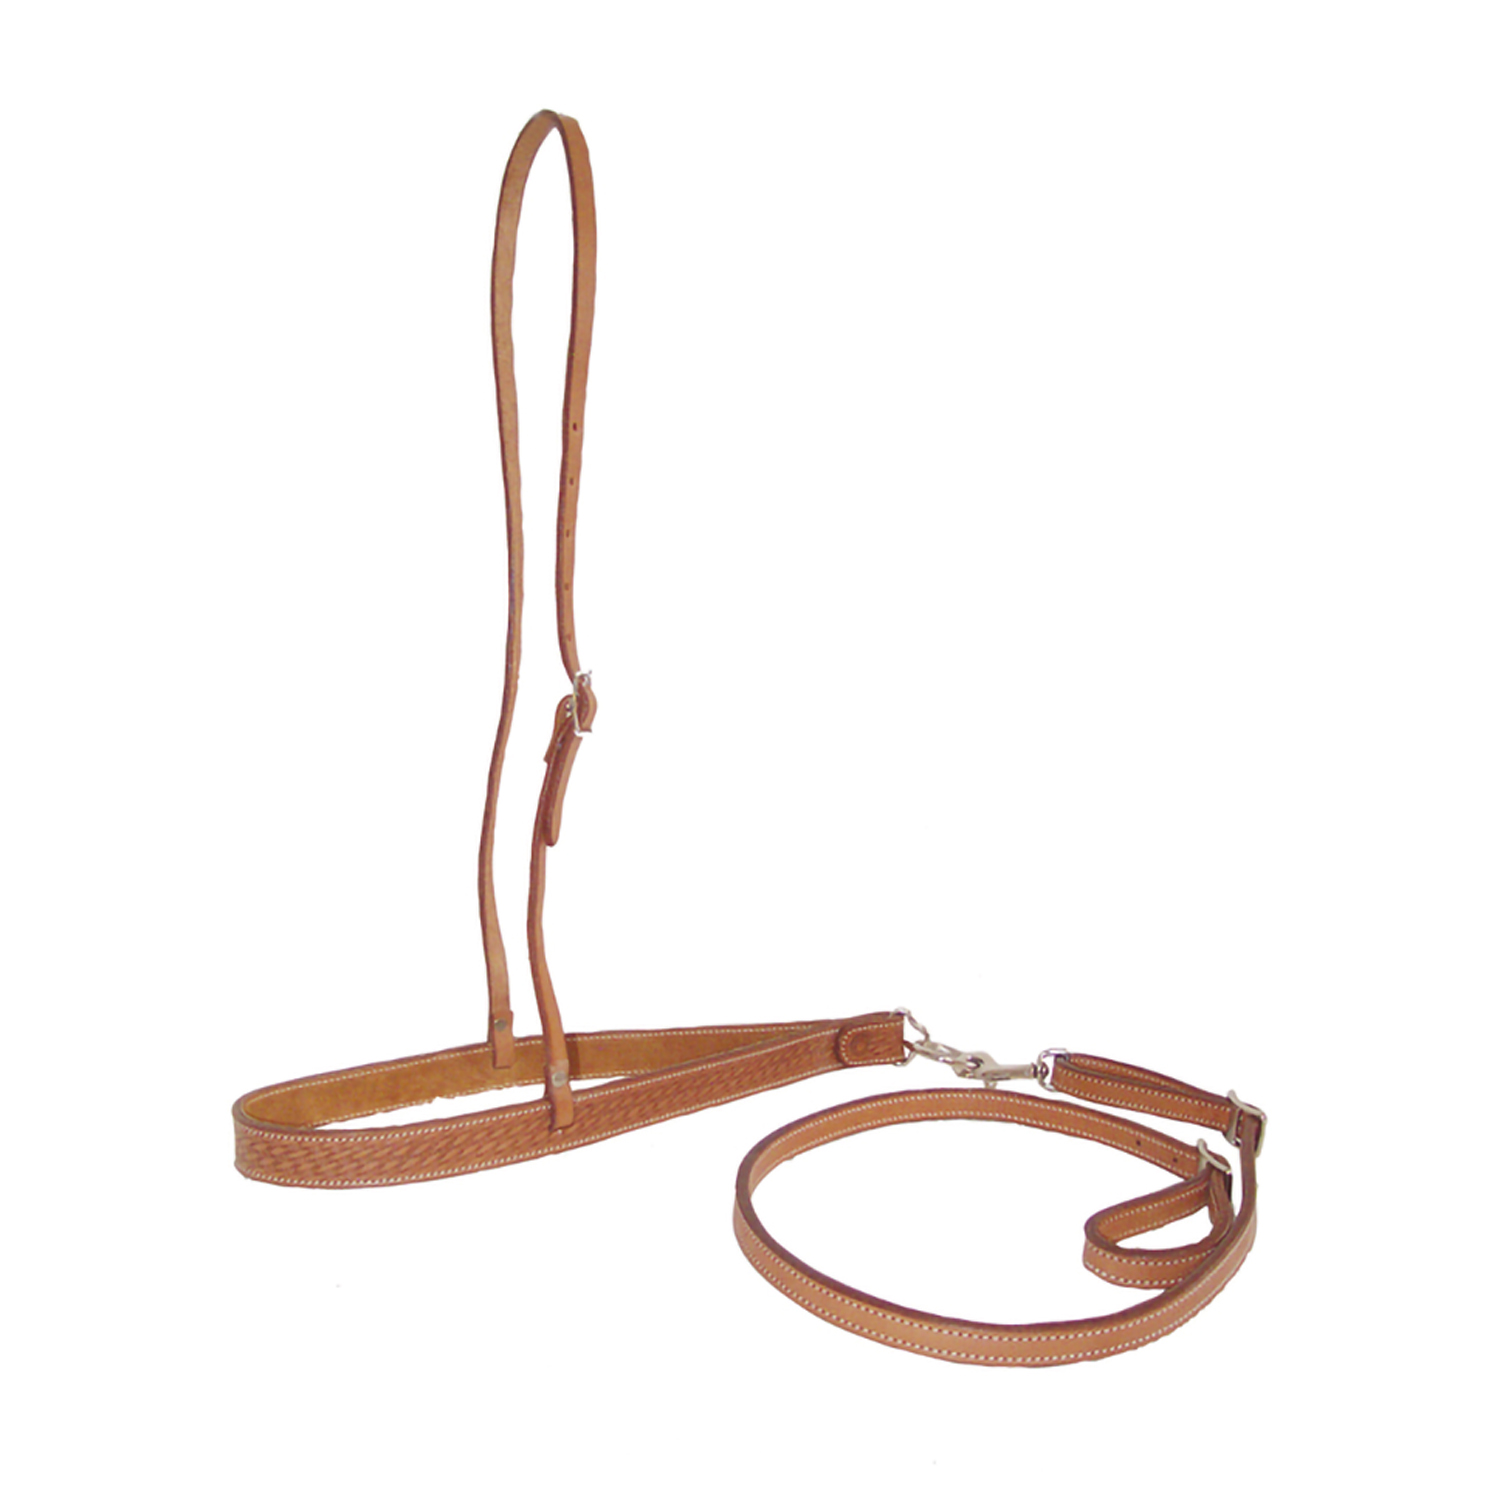 0010991 pools nose band tie down sc1489 3